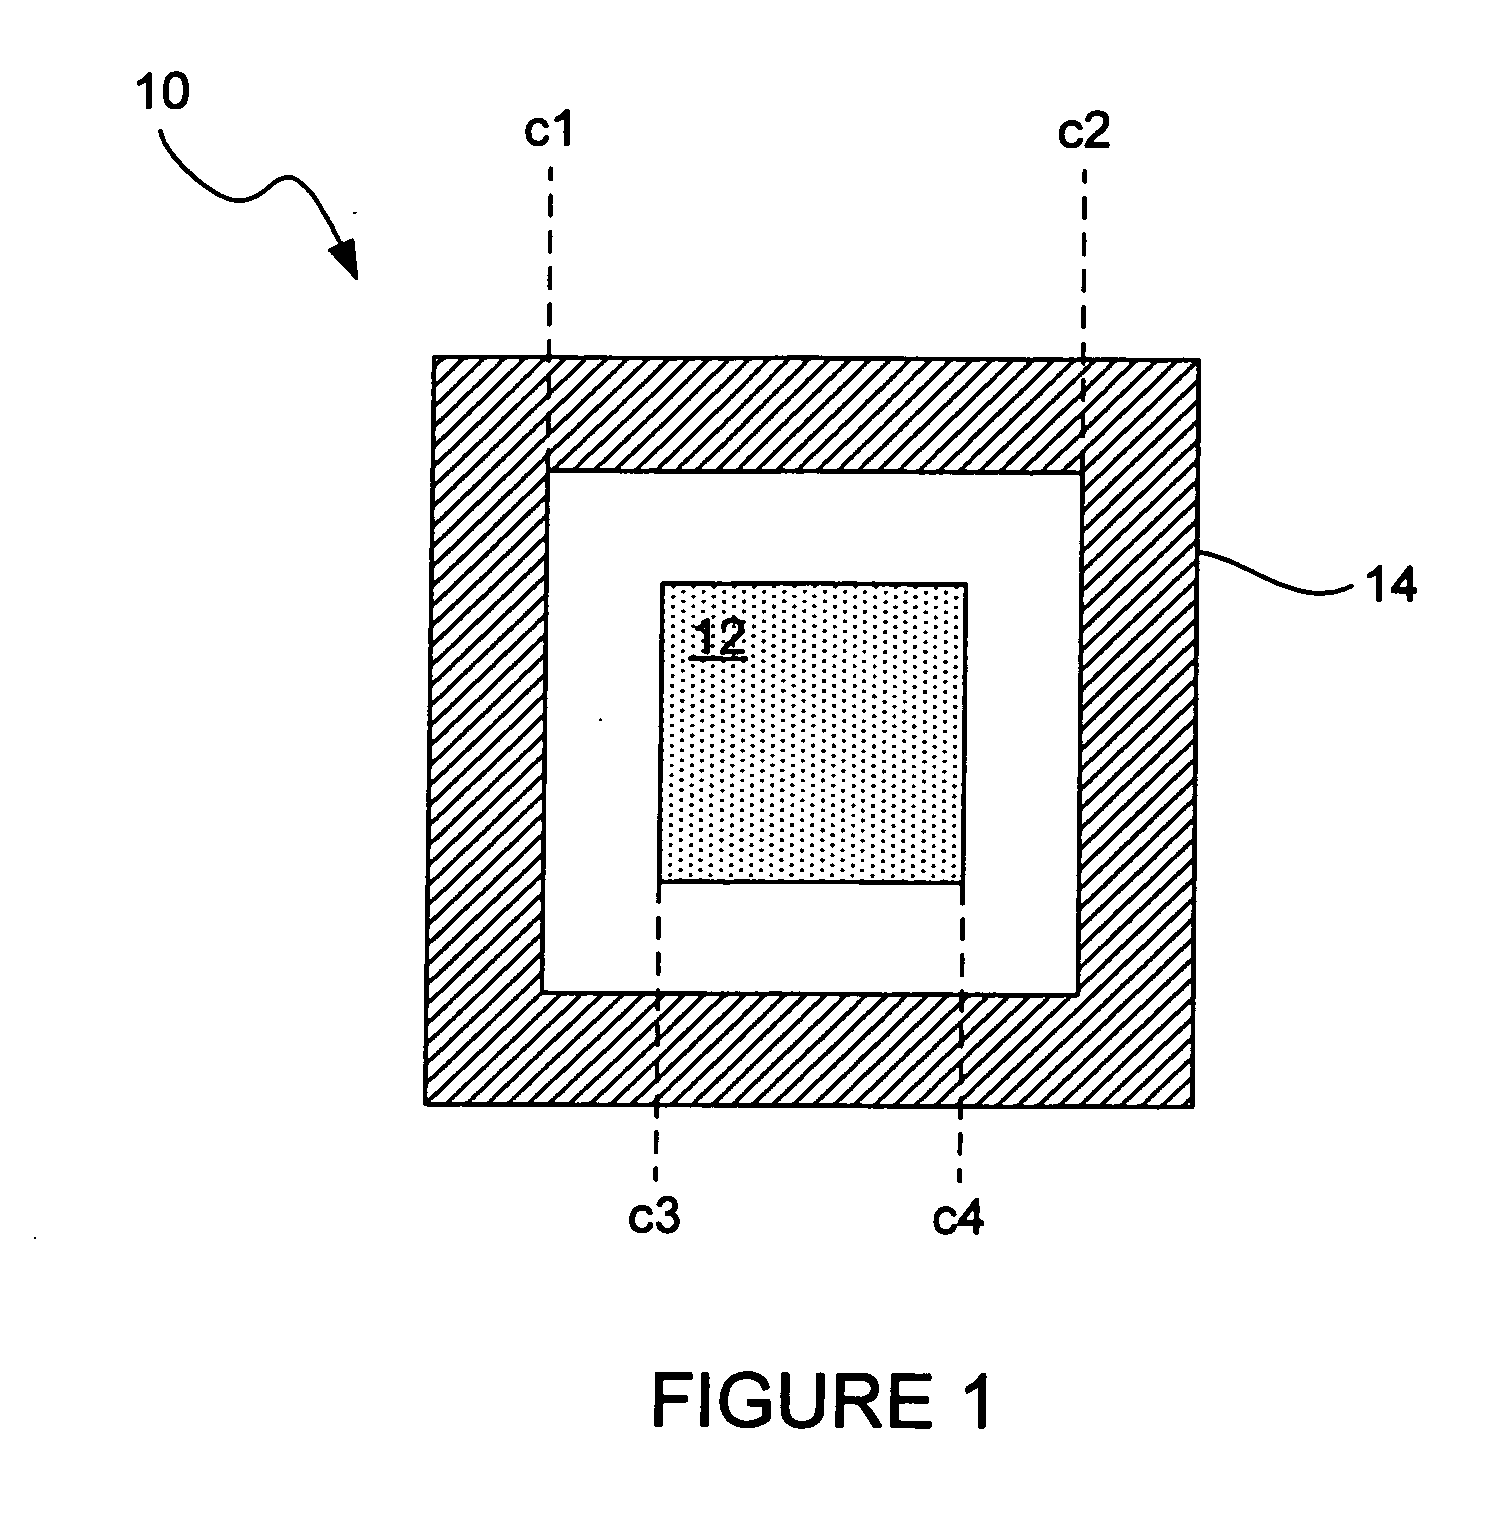 Apparatus and methods for determining overlay of structures having rotational or mirror symmetry